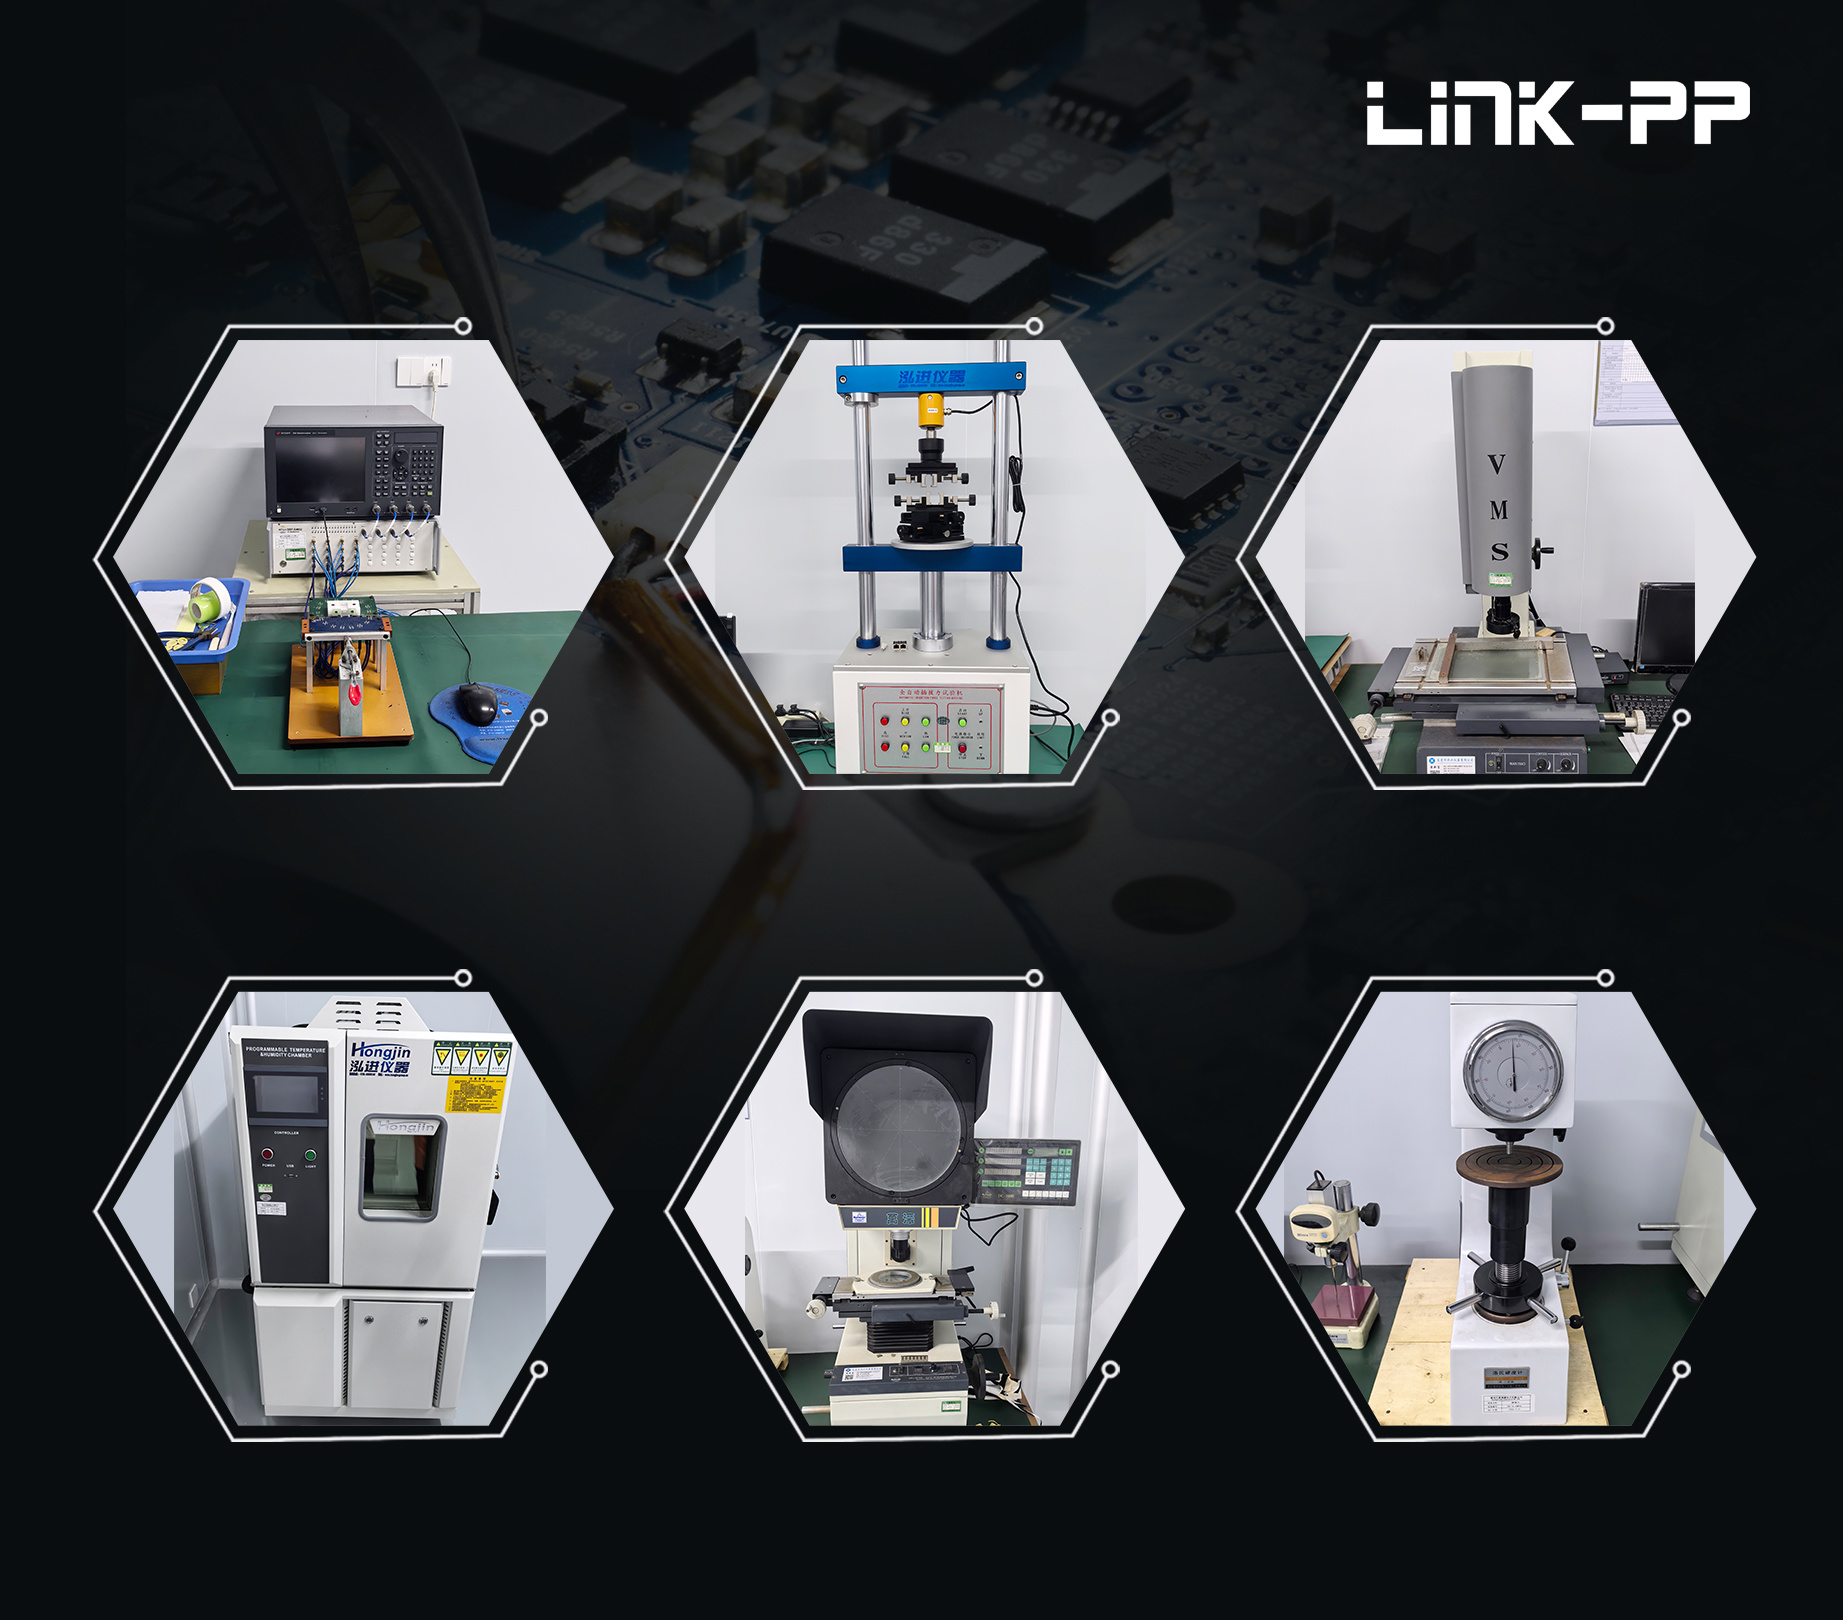 LINK-PP Lab Upgrade: Advanced Comprehensive Testing Facilities